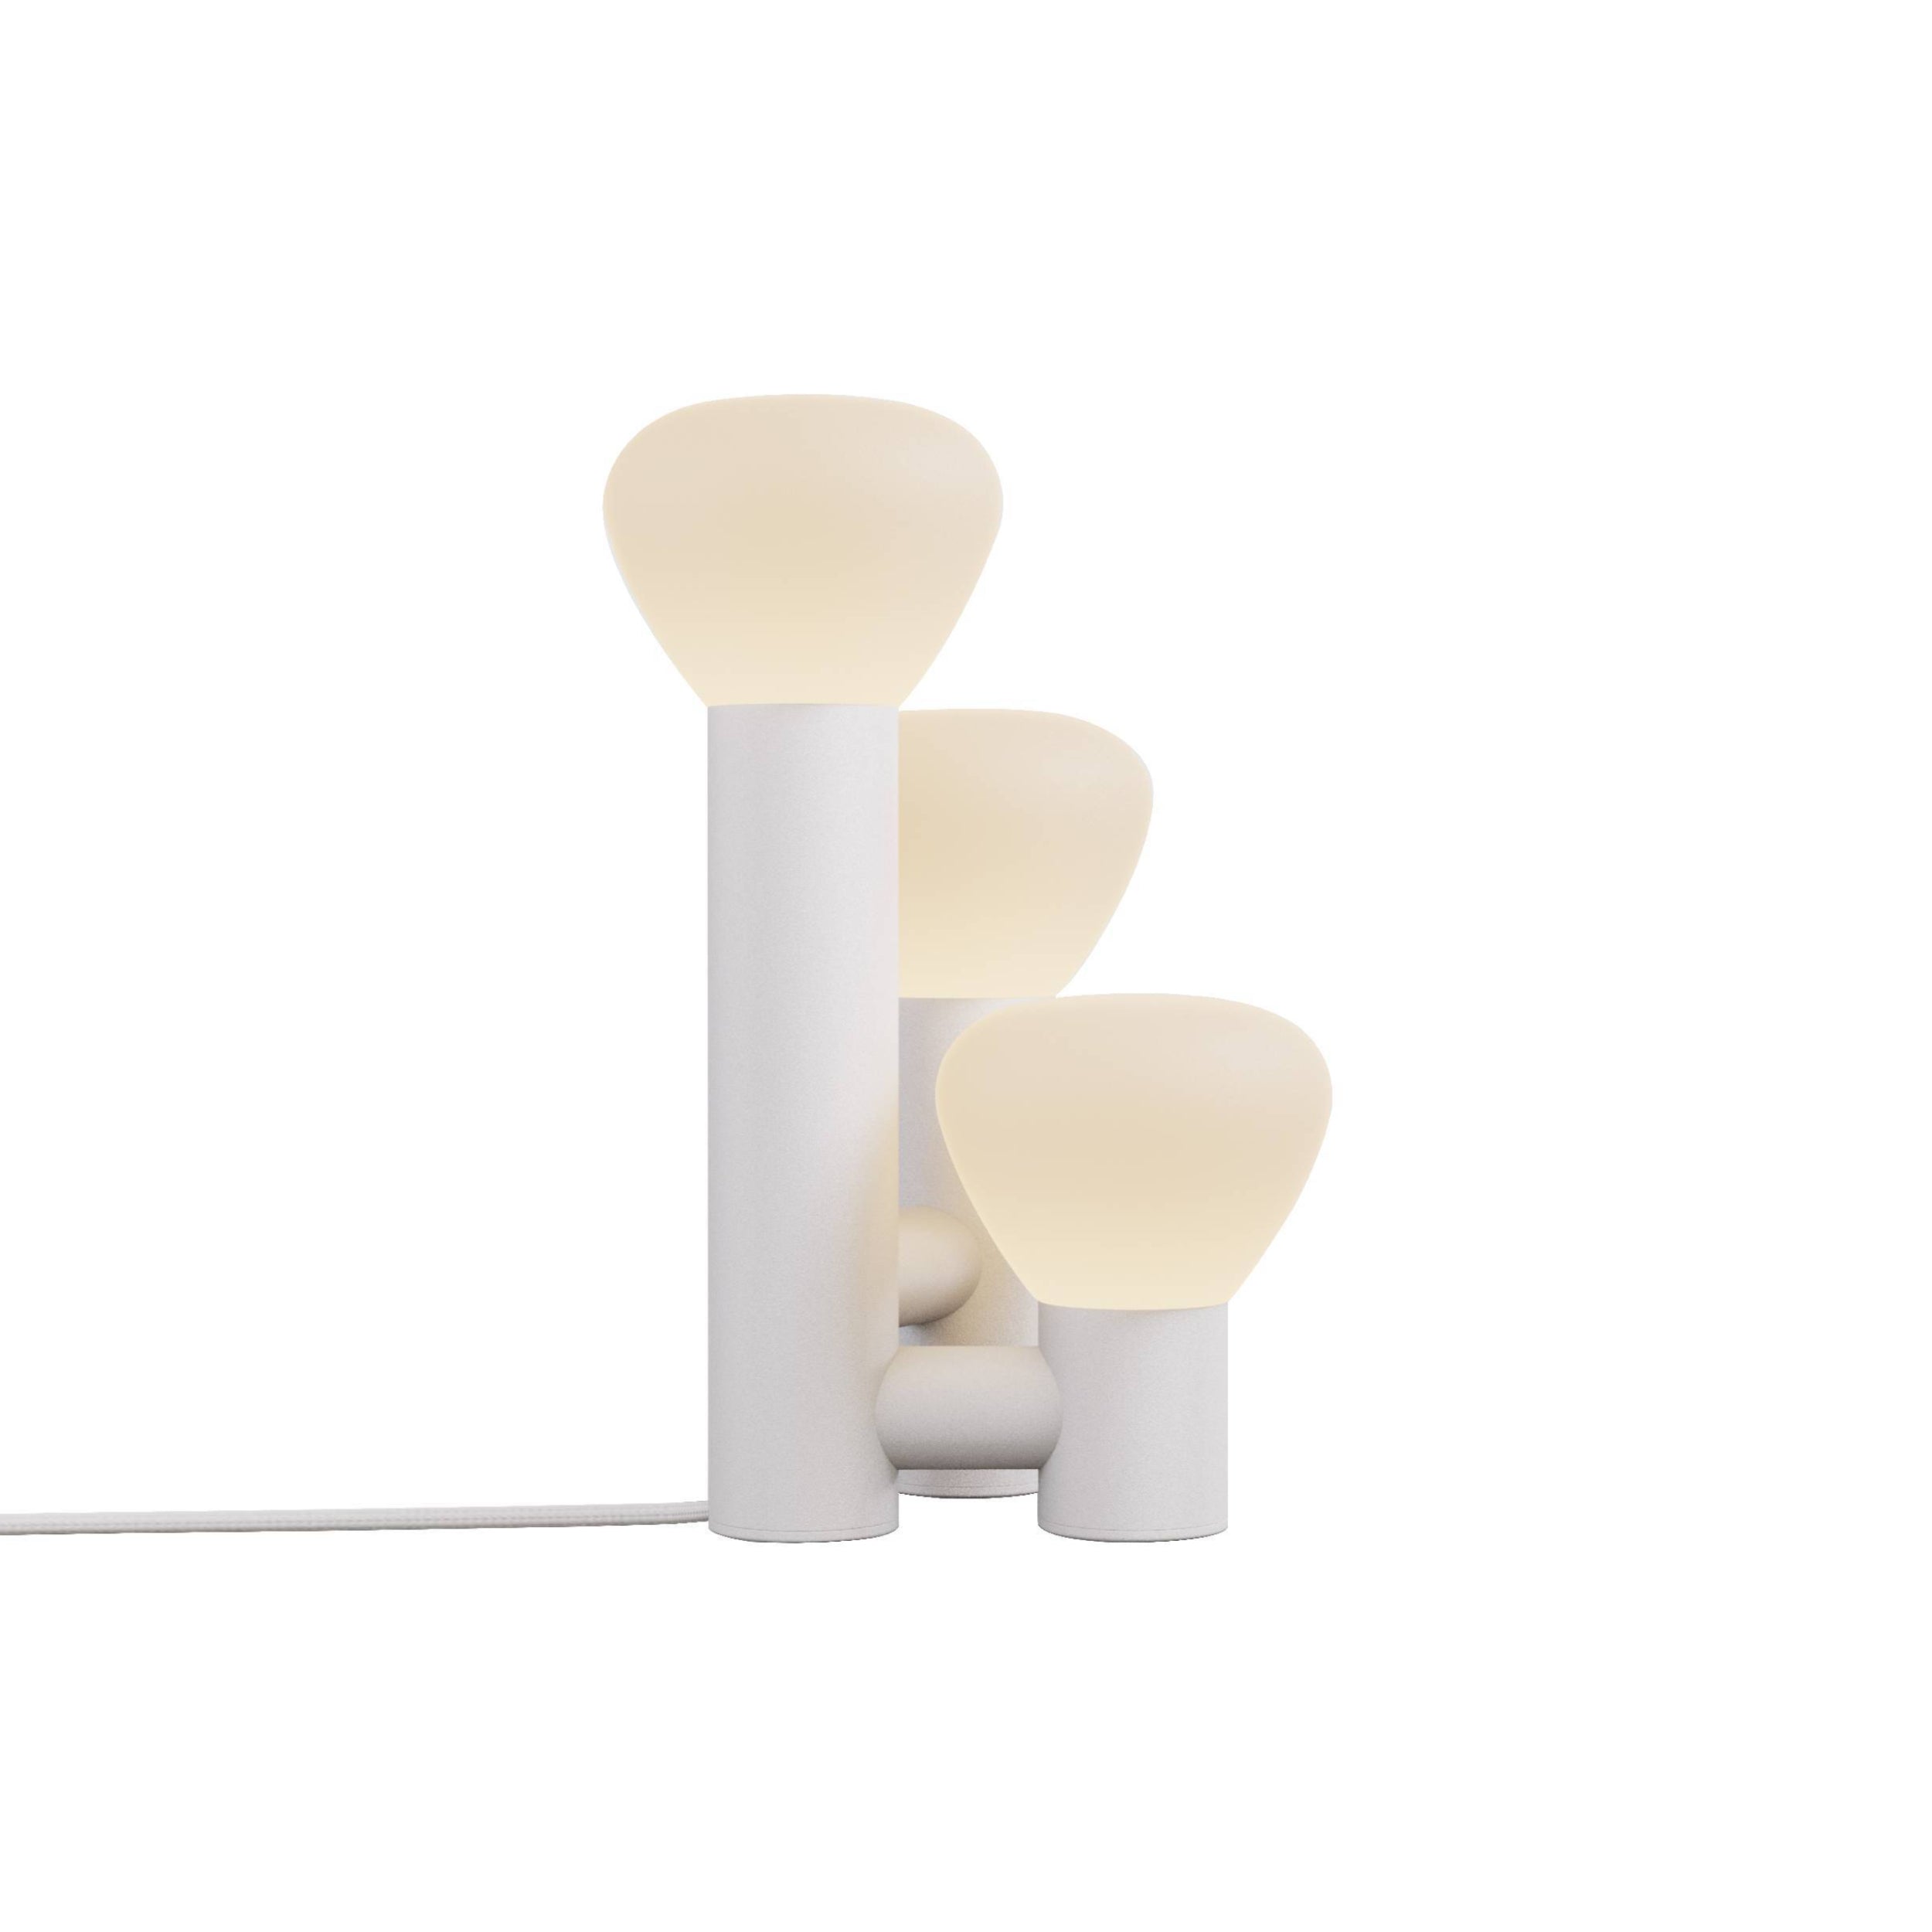 Parc 06 Table Lamp: Footswitch + White + White